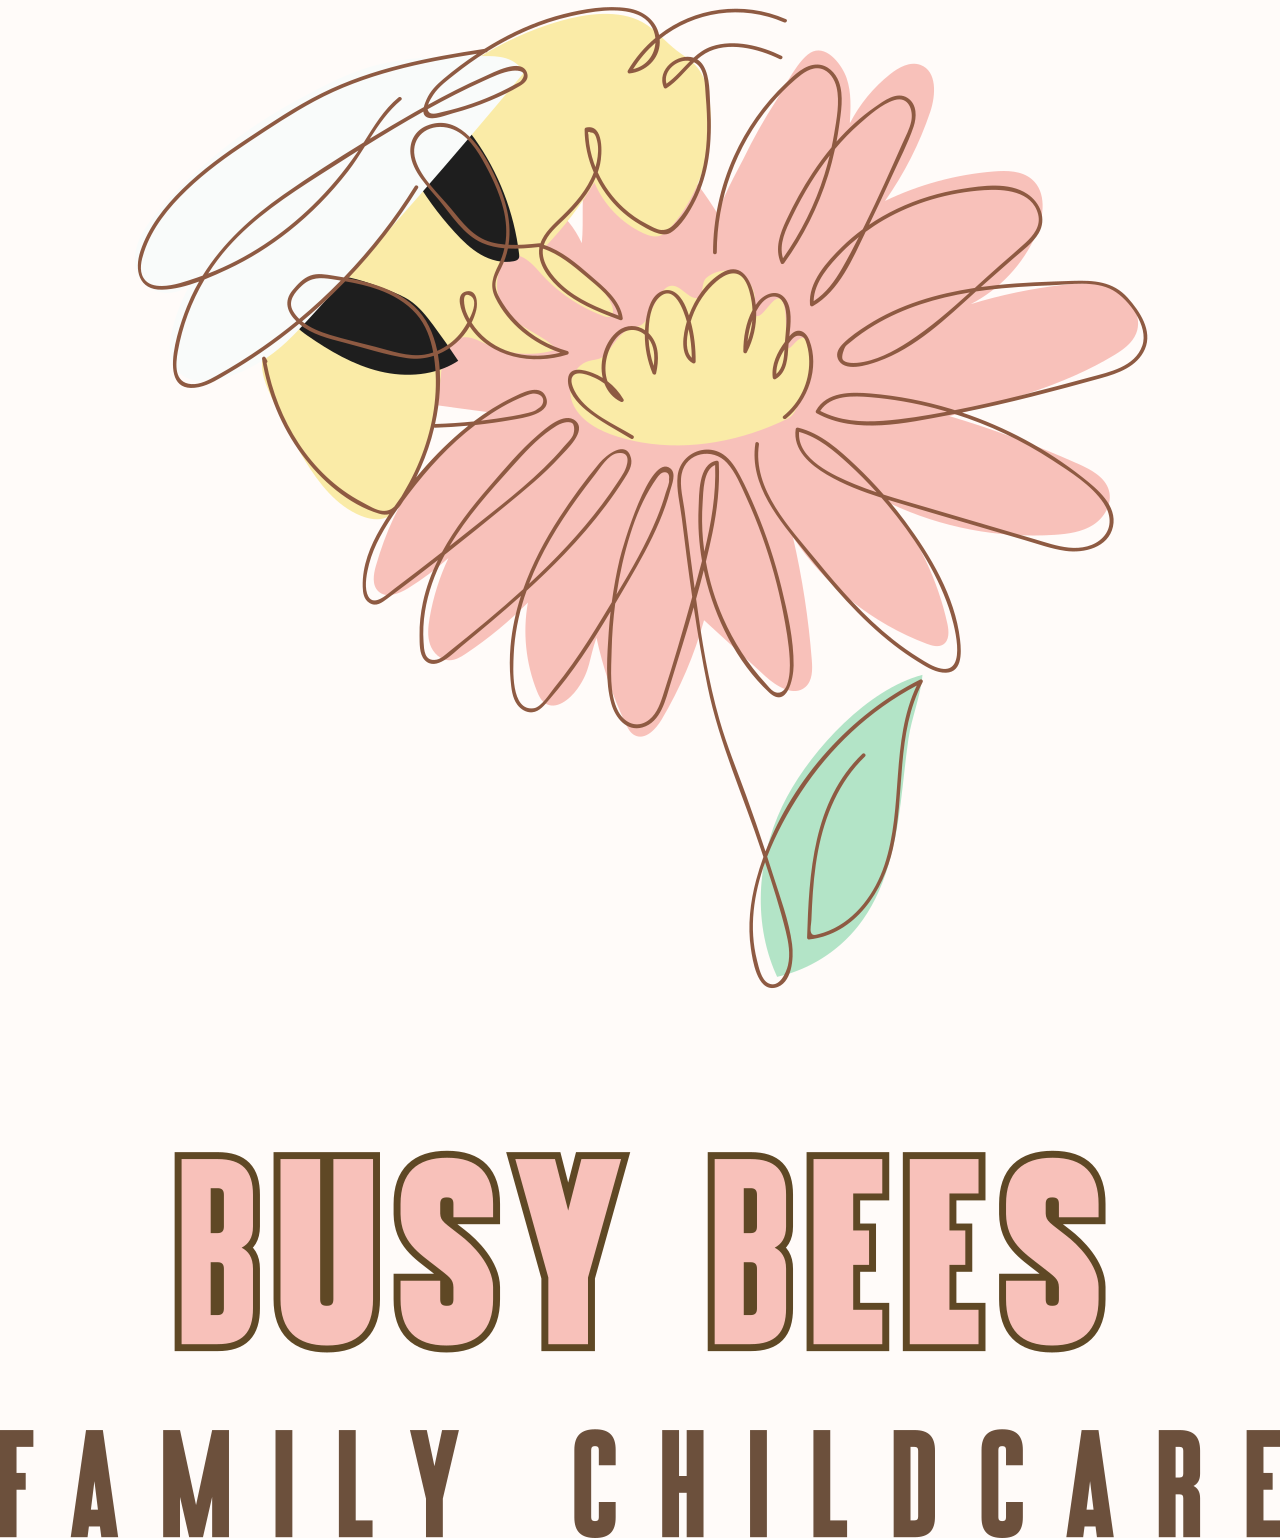 Busy Bees's logo